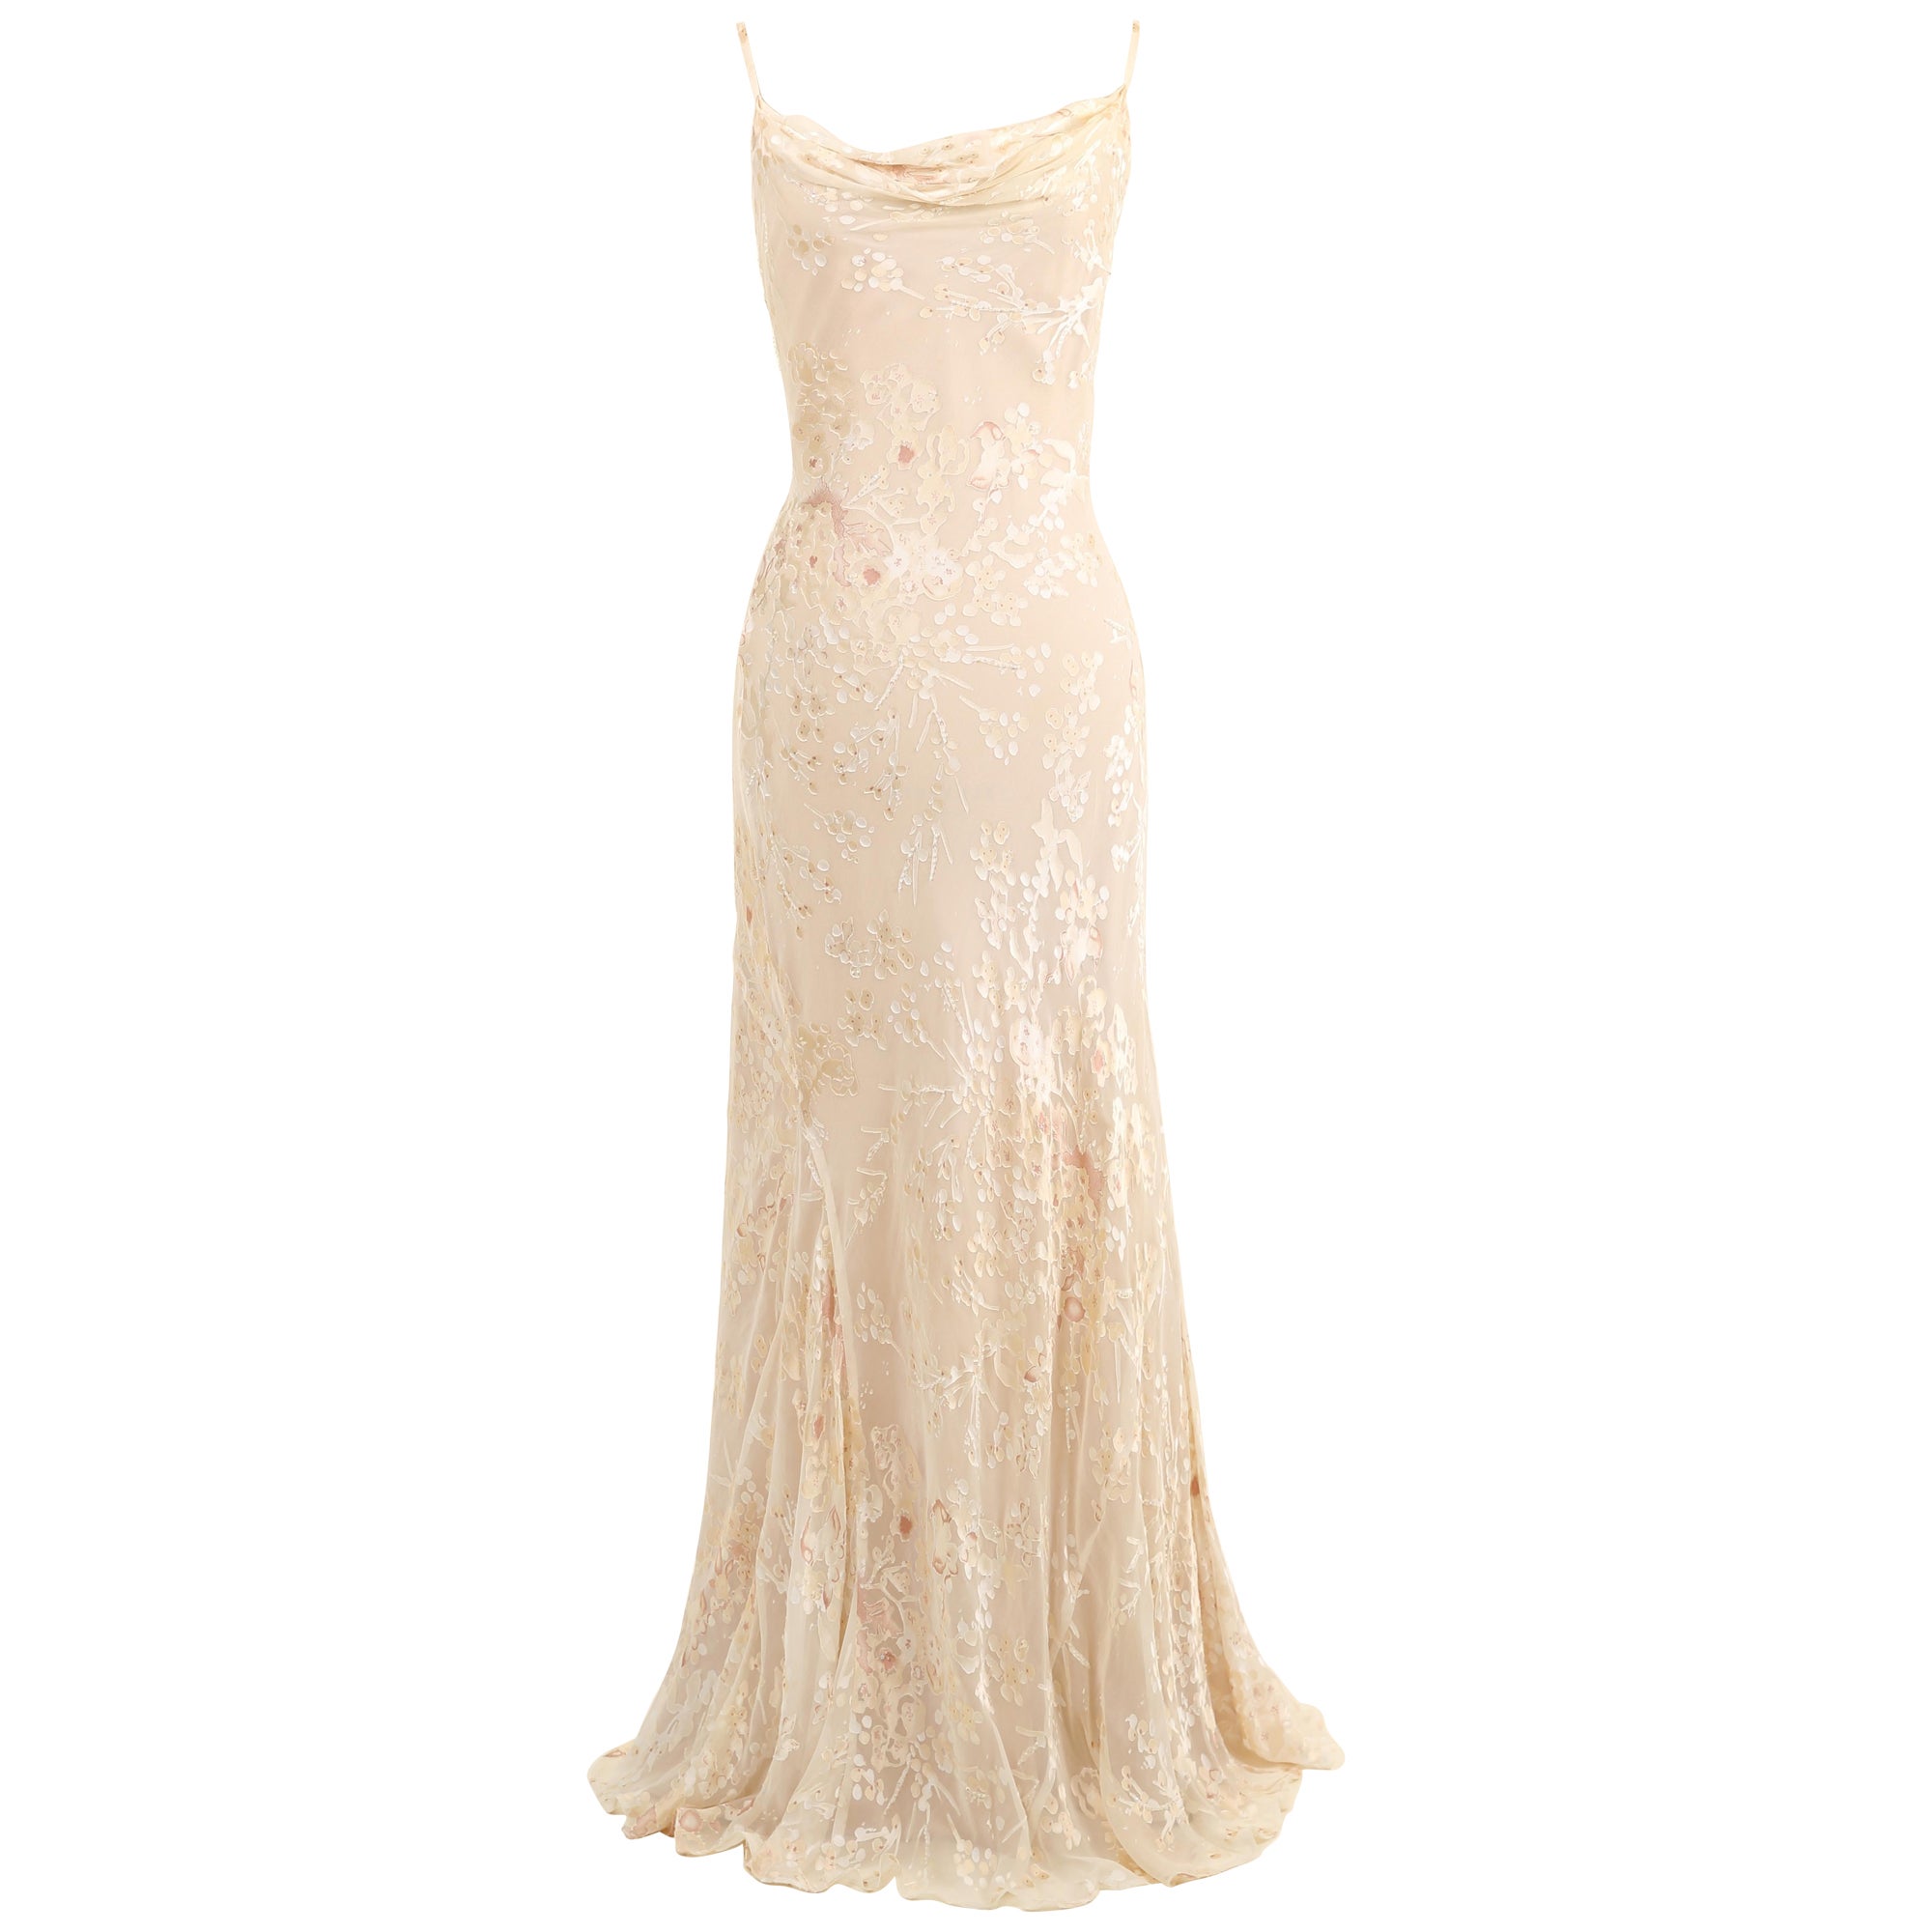 Vintage nude ivory beaded silk sheer floral layered wedding slip dress gown M L For Sale